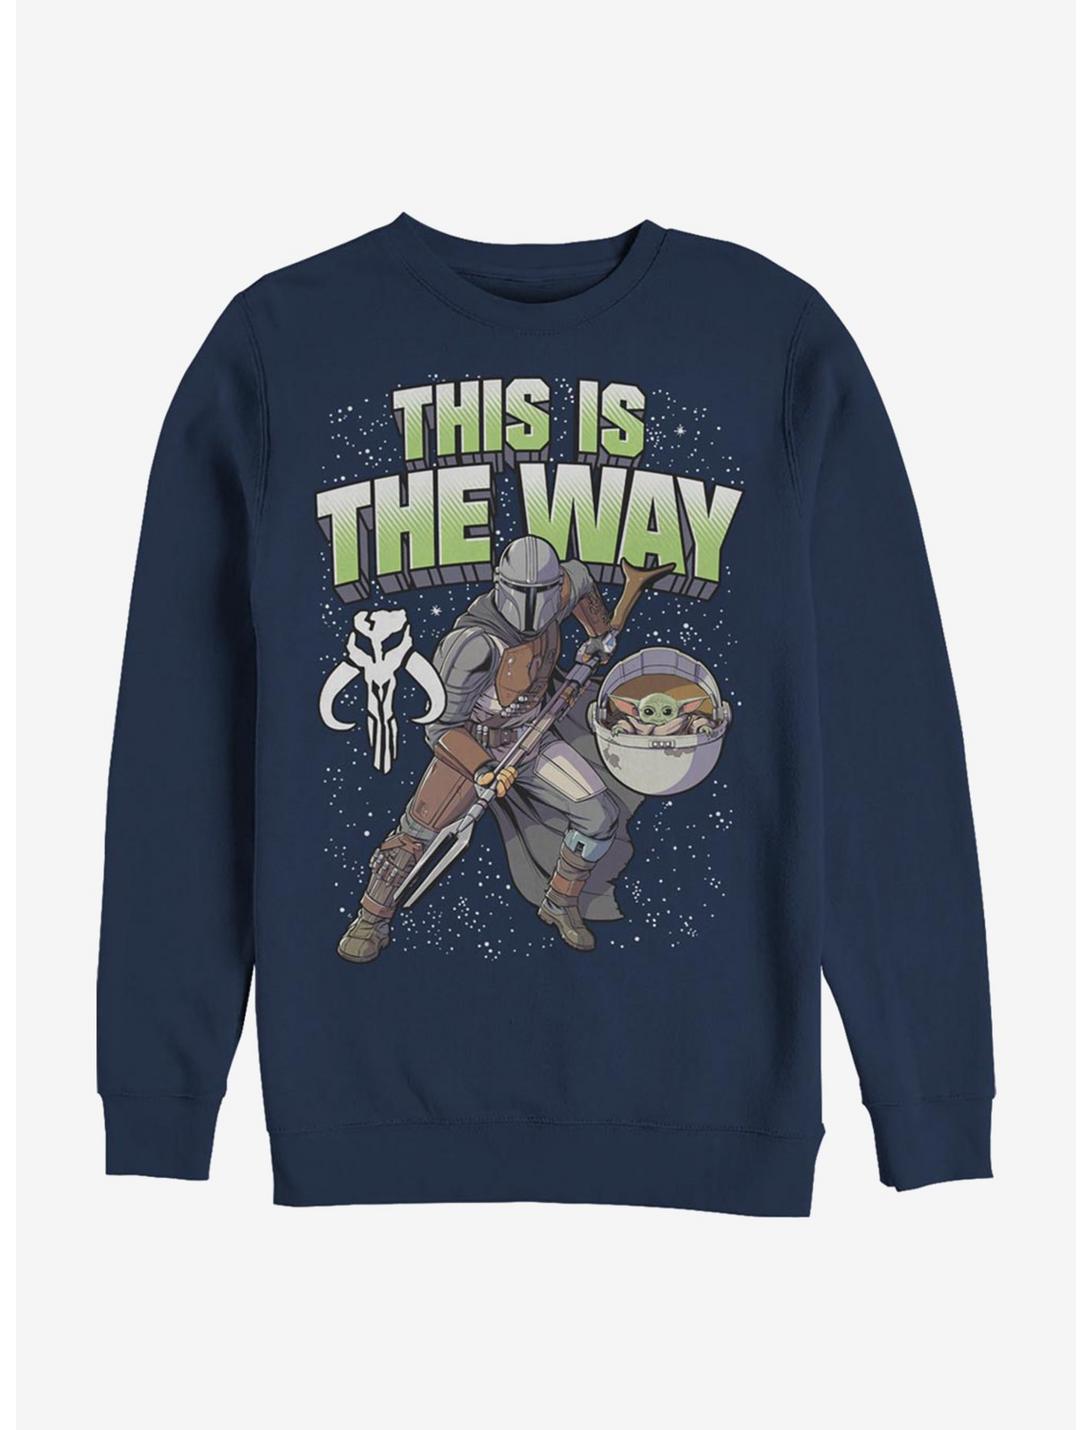 Star Wars The Mandalorian This Is The Way Large Letters Sweatshirt, NAVY, hi-res